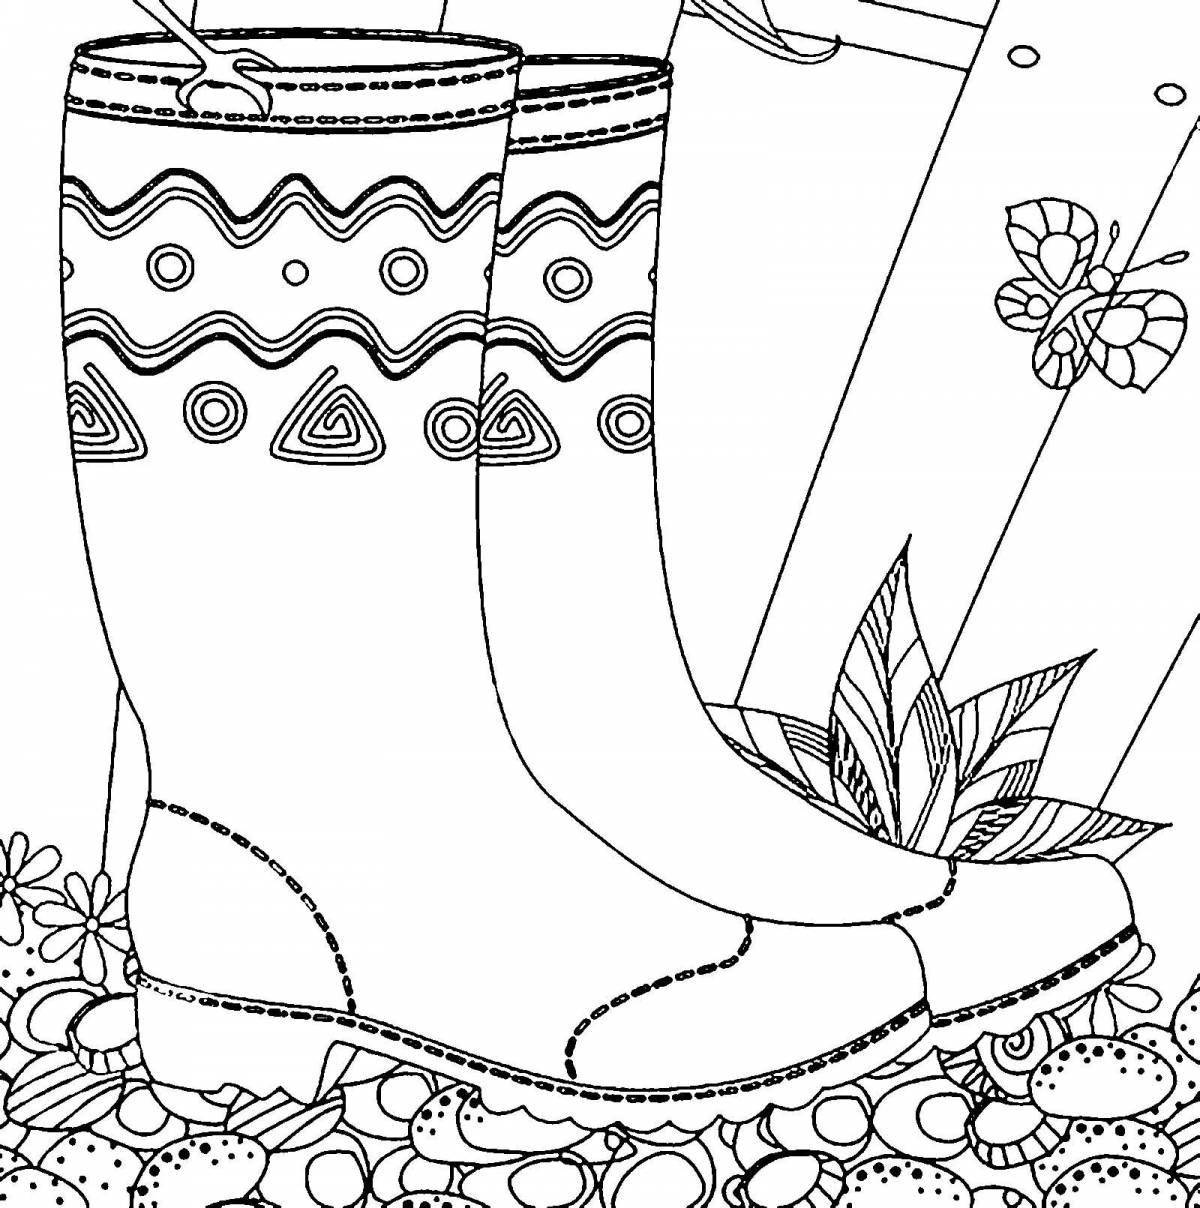 Coloring page wonderful rubber boots